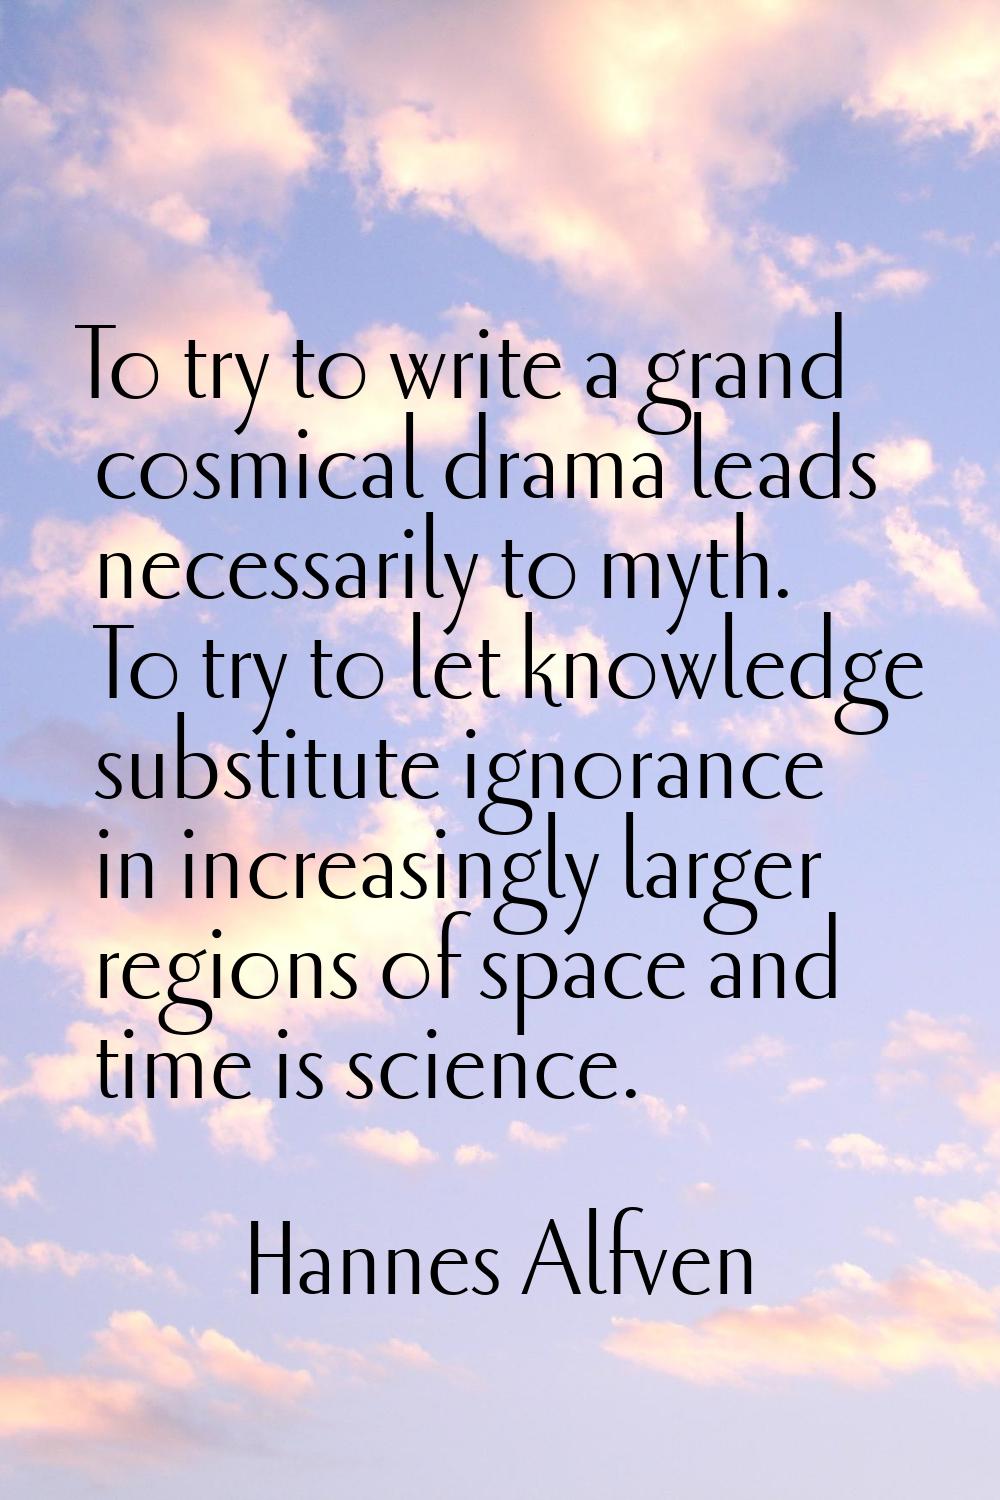 To try to write a grand cosmical drama leads necessarily to myth. To try to let knowledge substitut